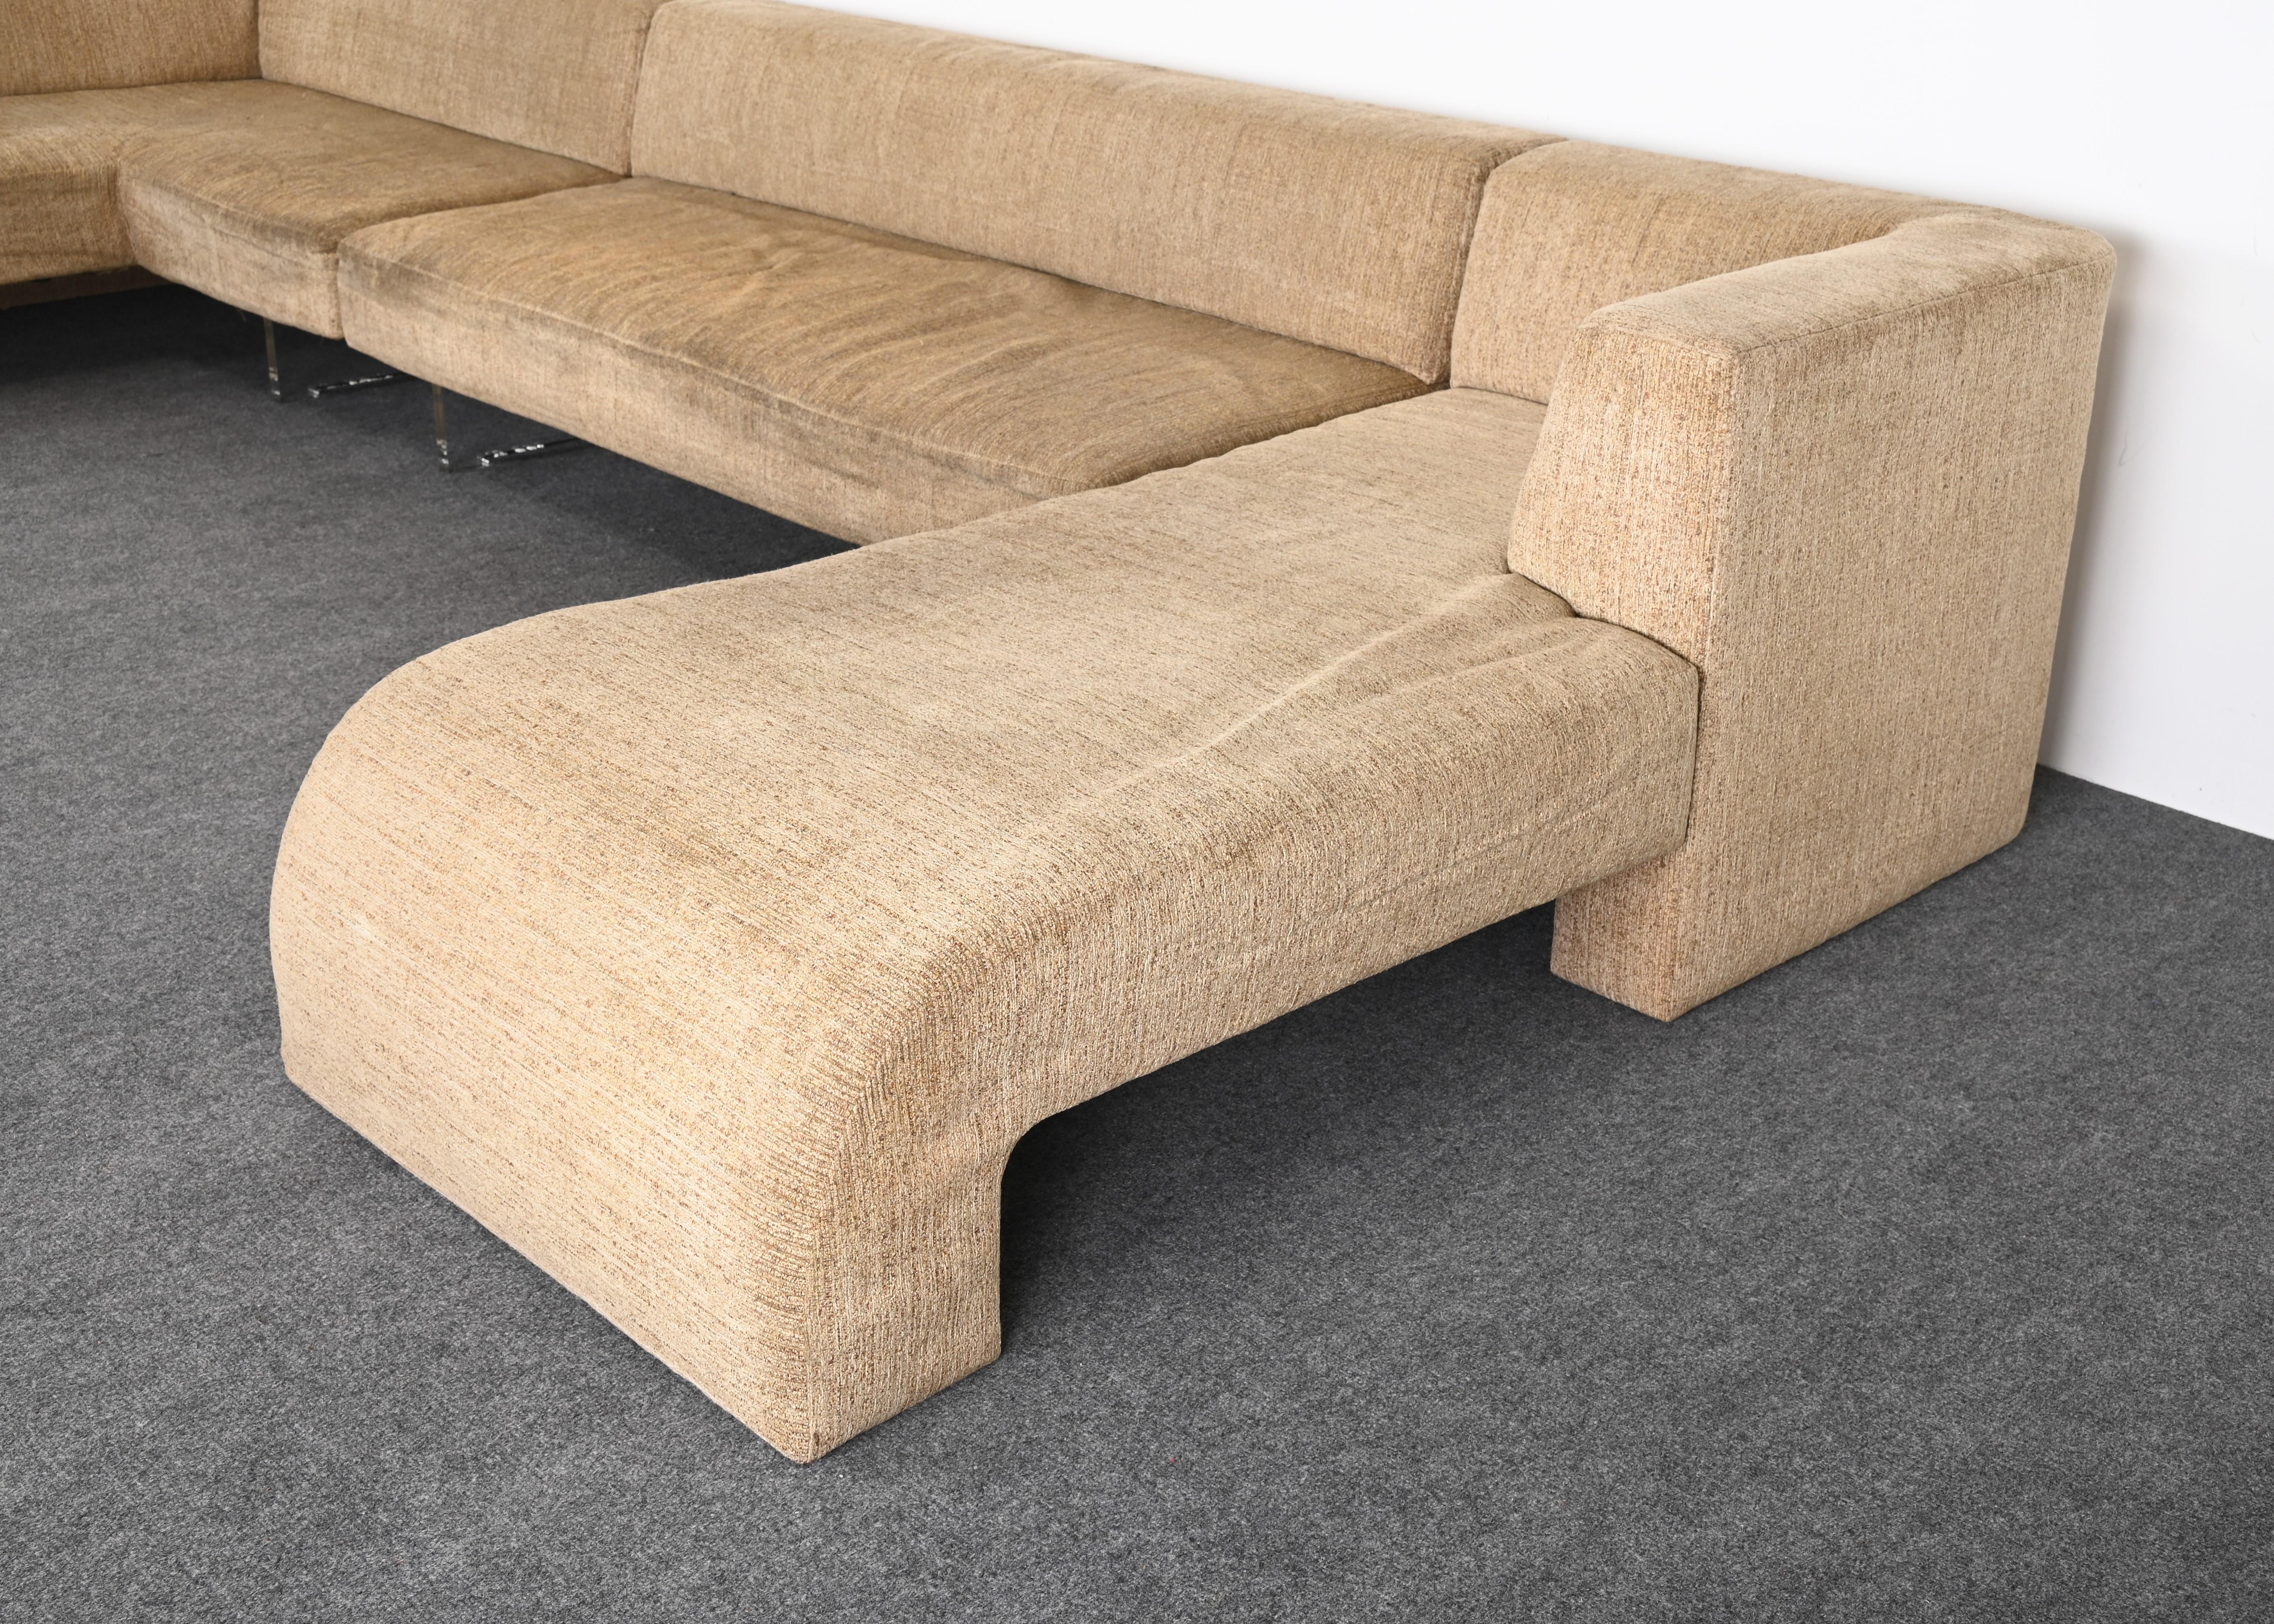 Monumental Sectional Sofa Designed by Vladimir Kagan, 1970s For Sale 4